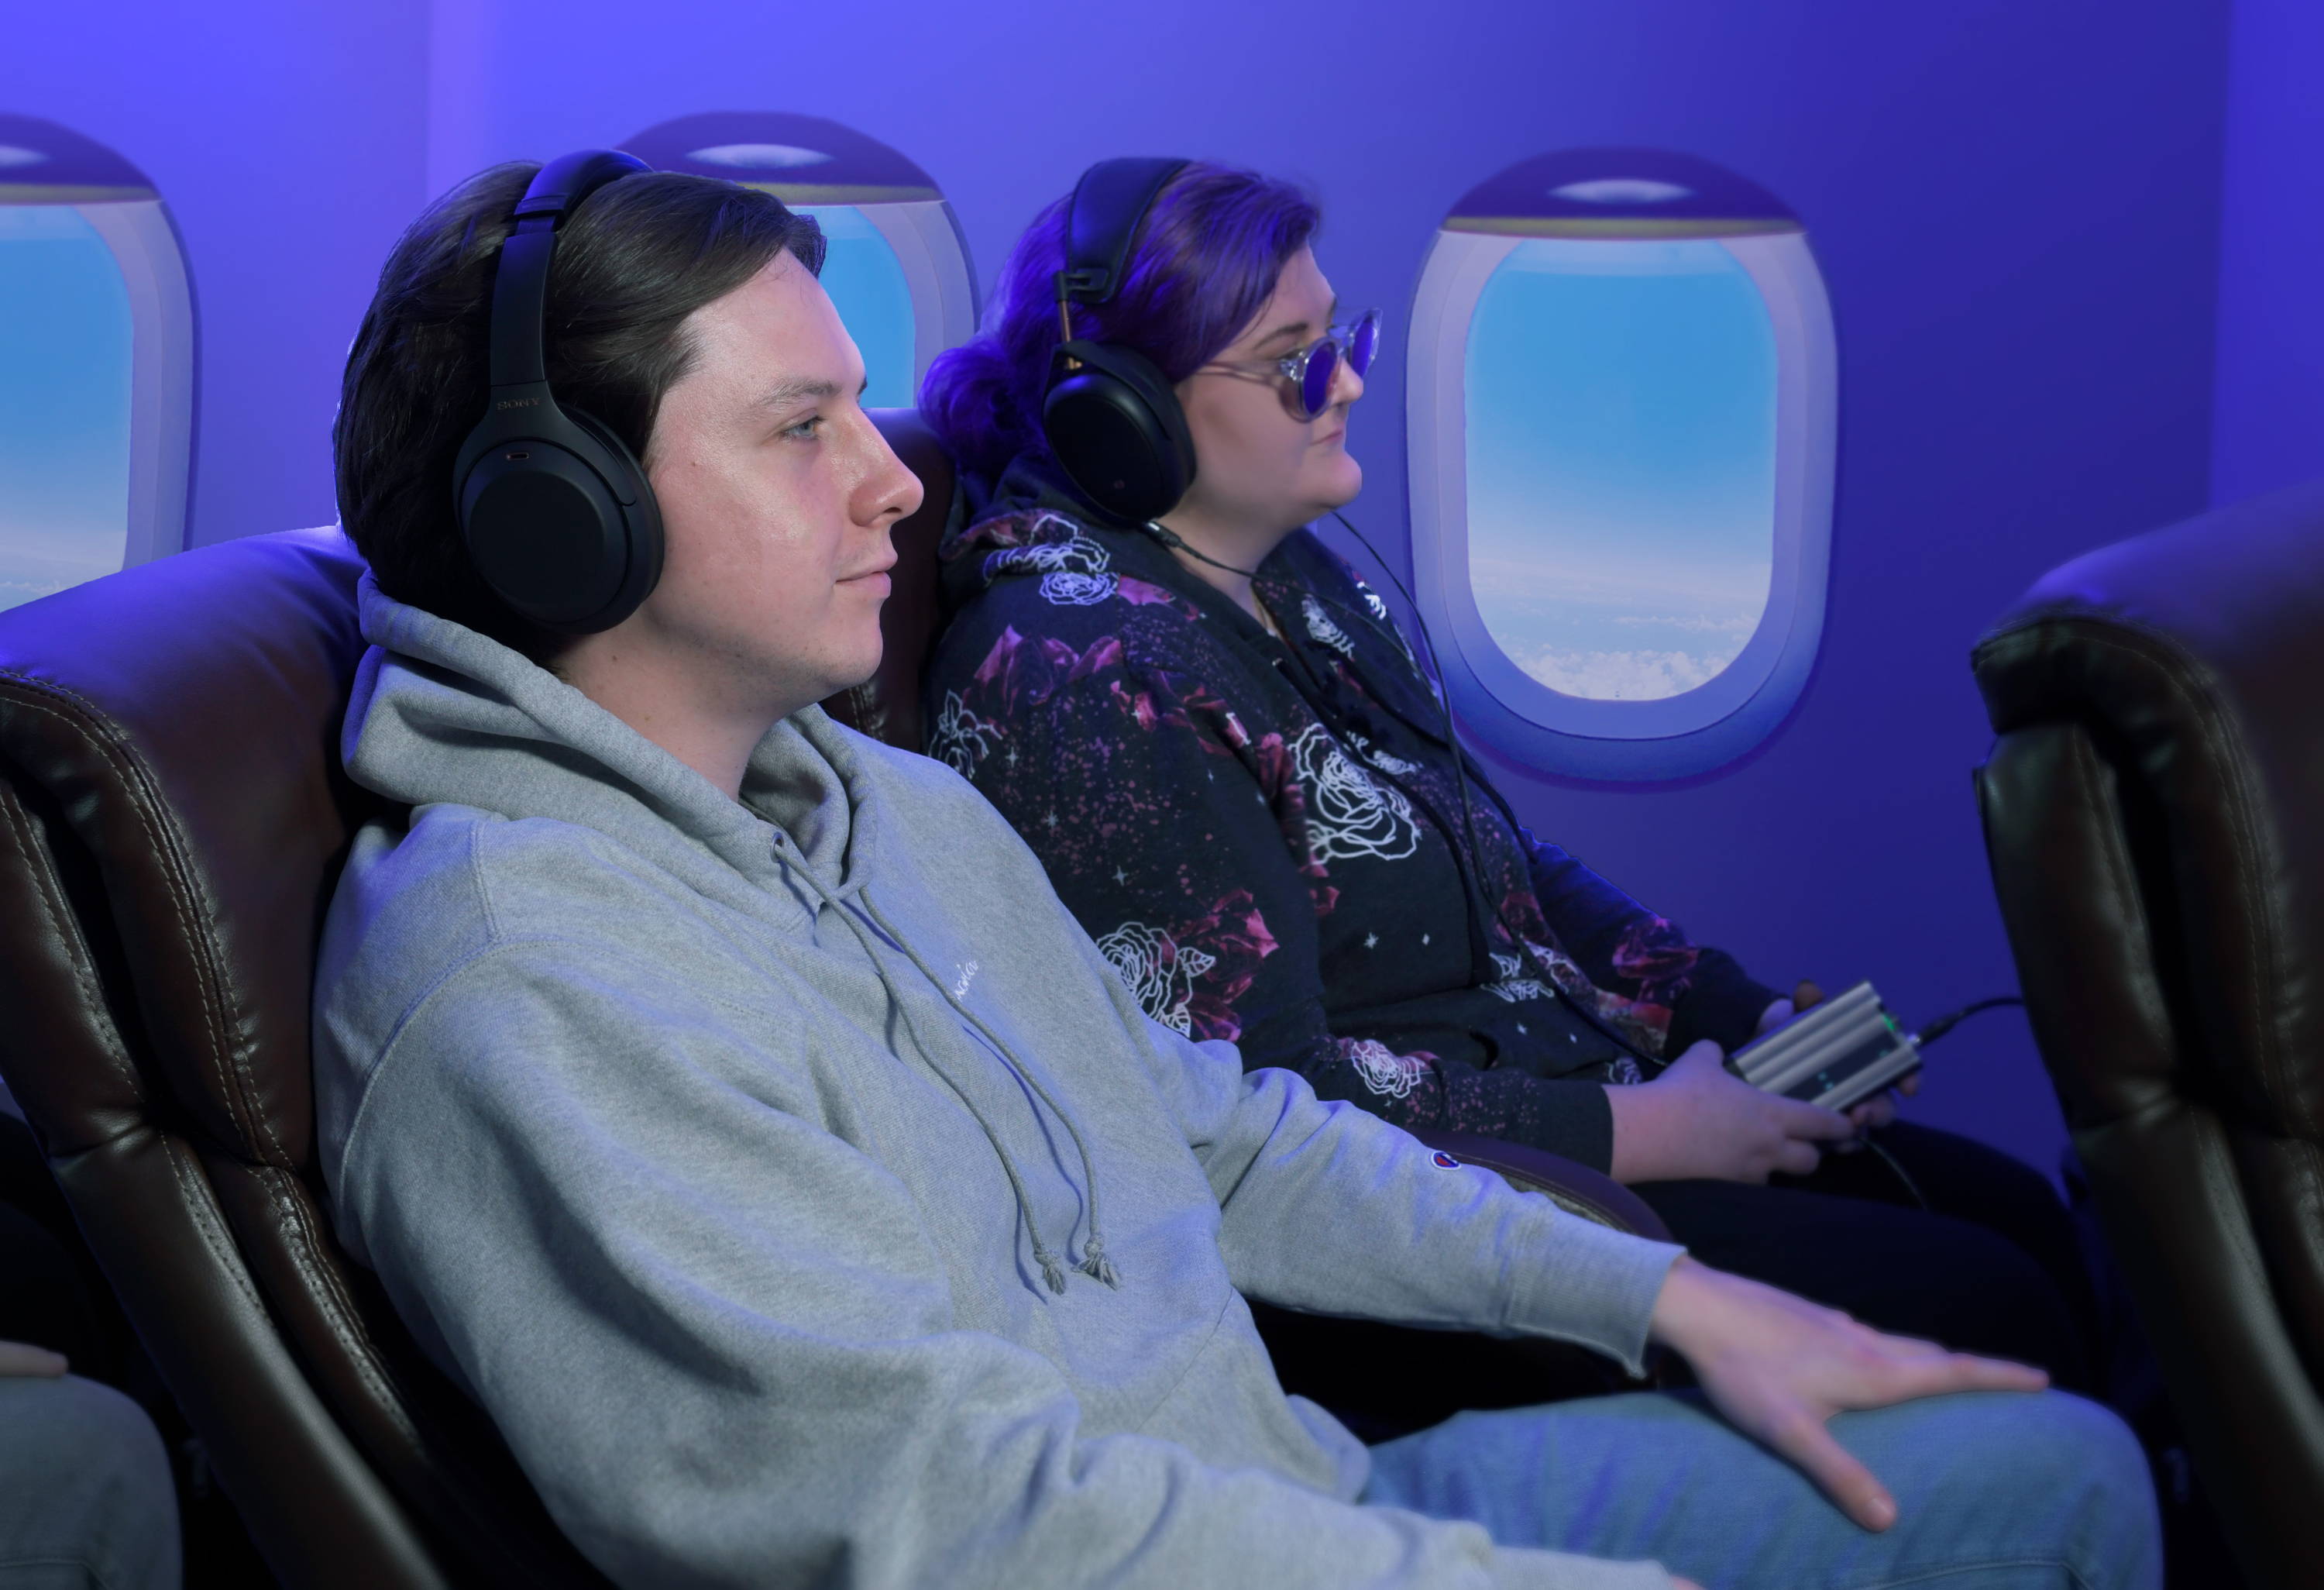 Two people sitting on an airplane with headphones